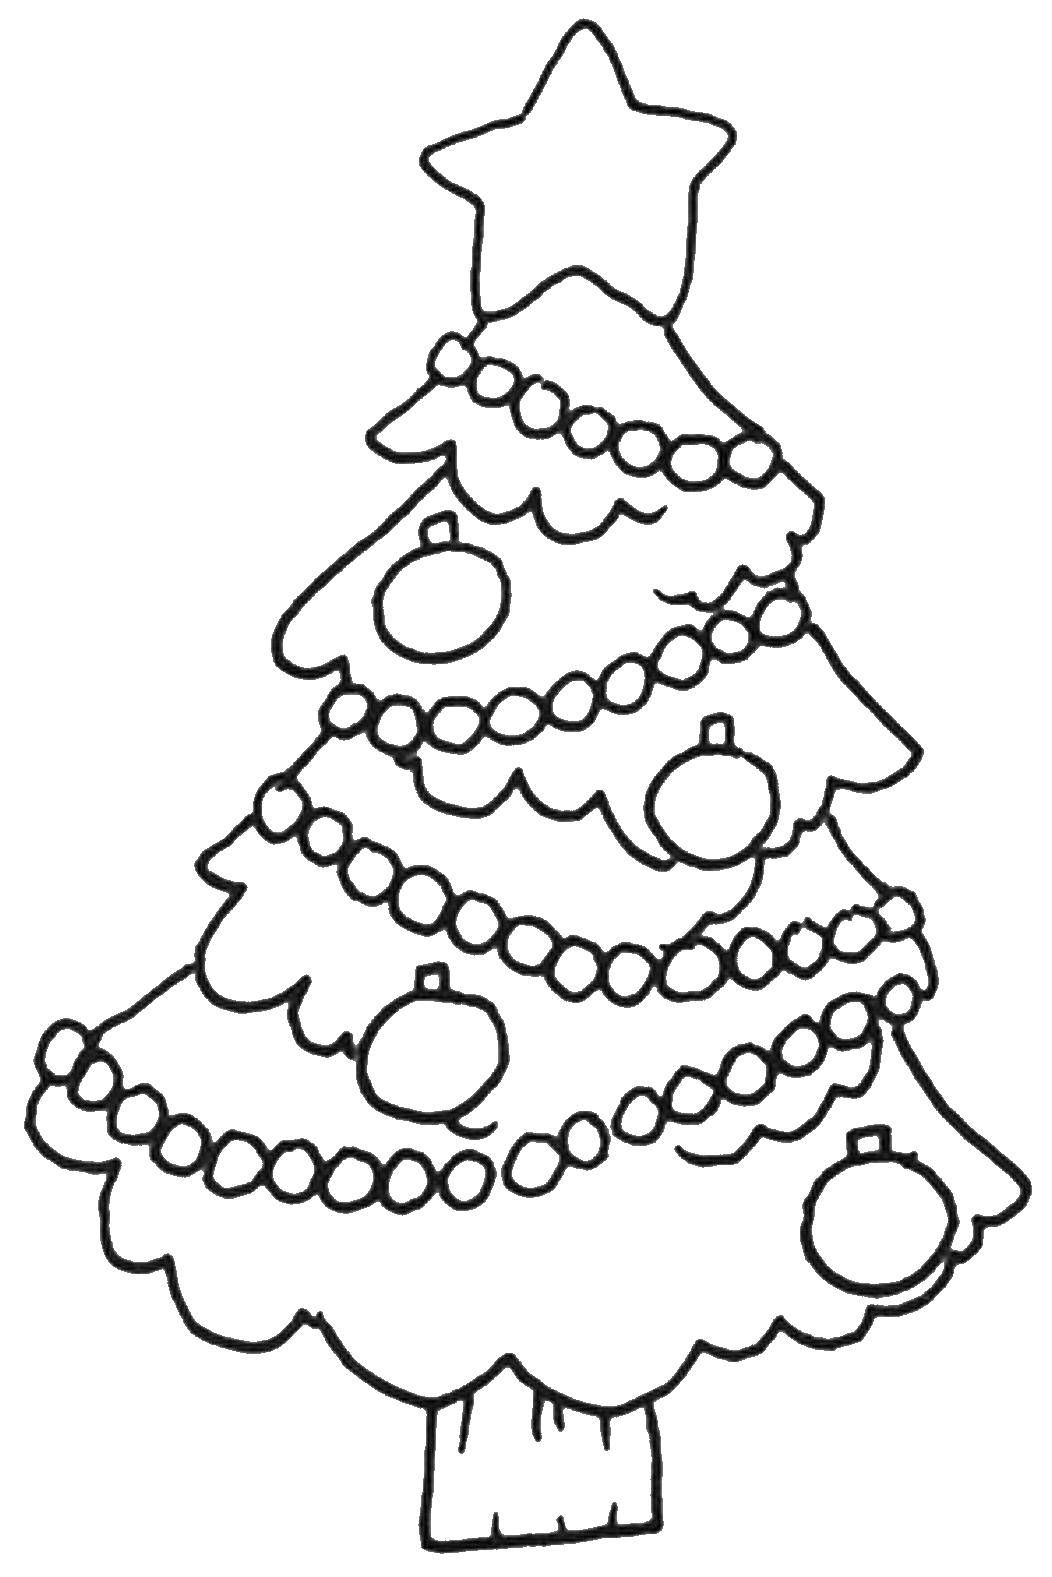 Coloring Dressed Christmas tree. Category Christmas. Tags:  tree, star, tree, new year.